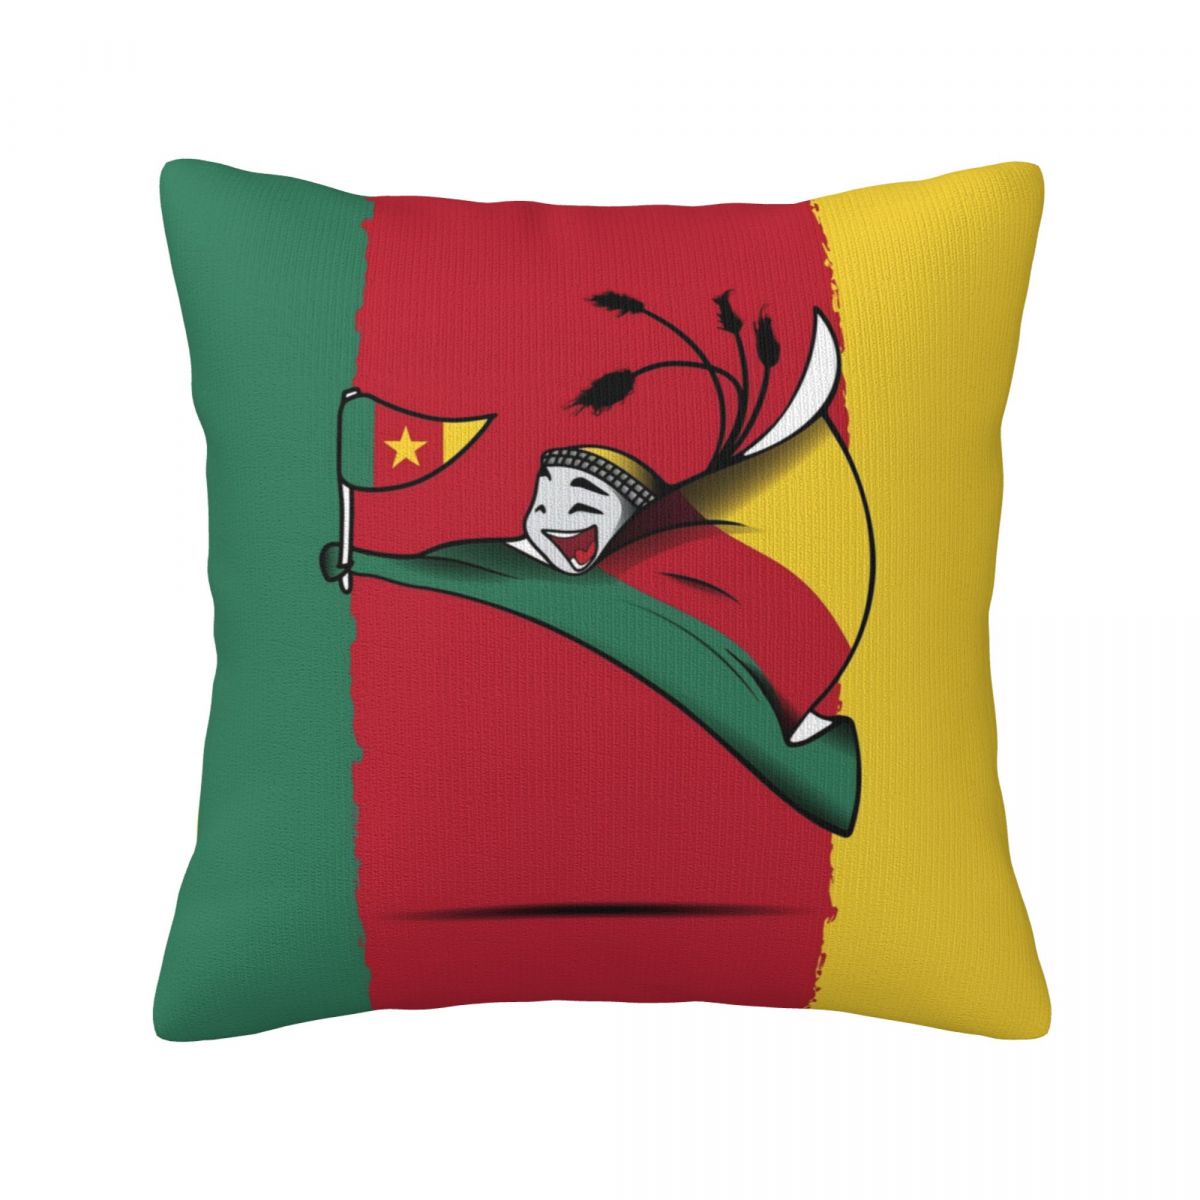 Cameroon World Cup 2022 Mascot Throw Pillow Covers 18x18